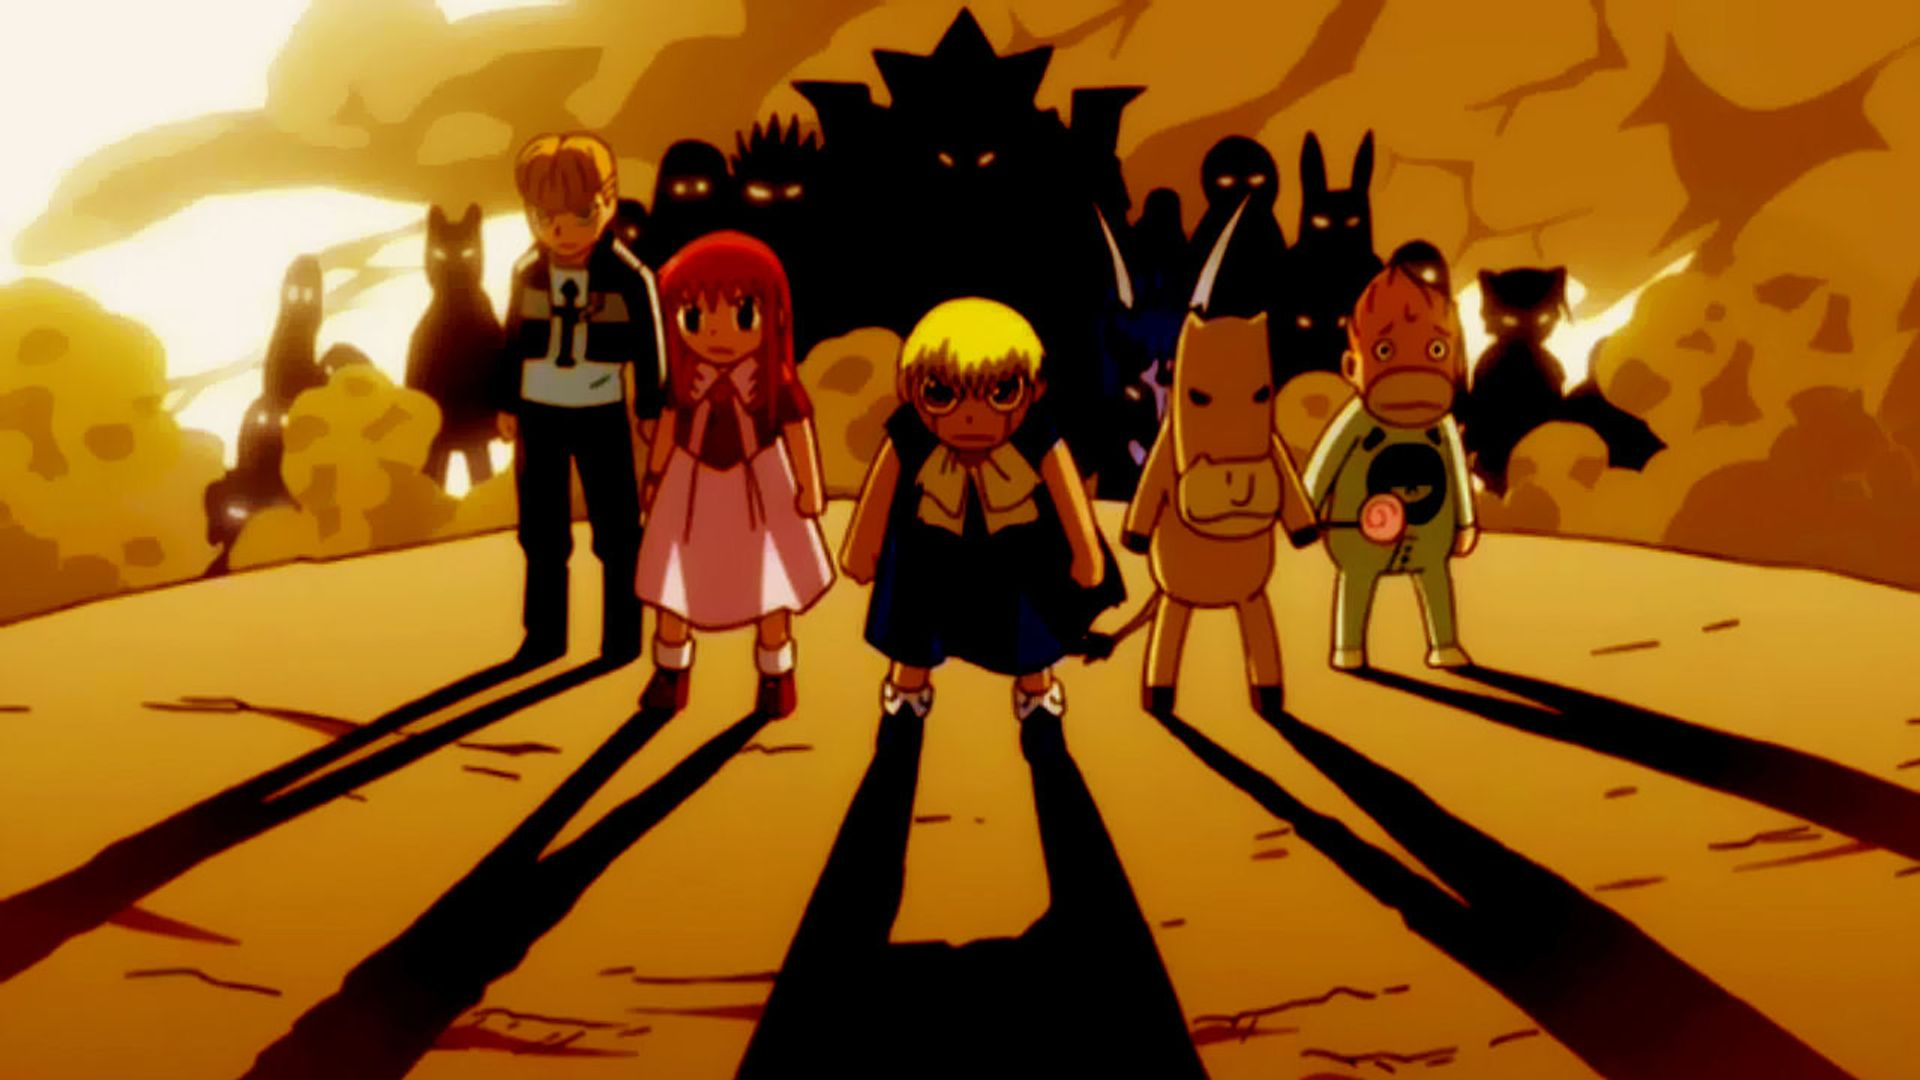 1920x1080 Zatch Bell! Watch Episodes on Hoopla or Streaming Online | Reelgood